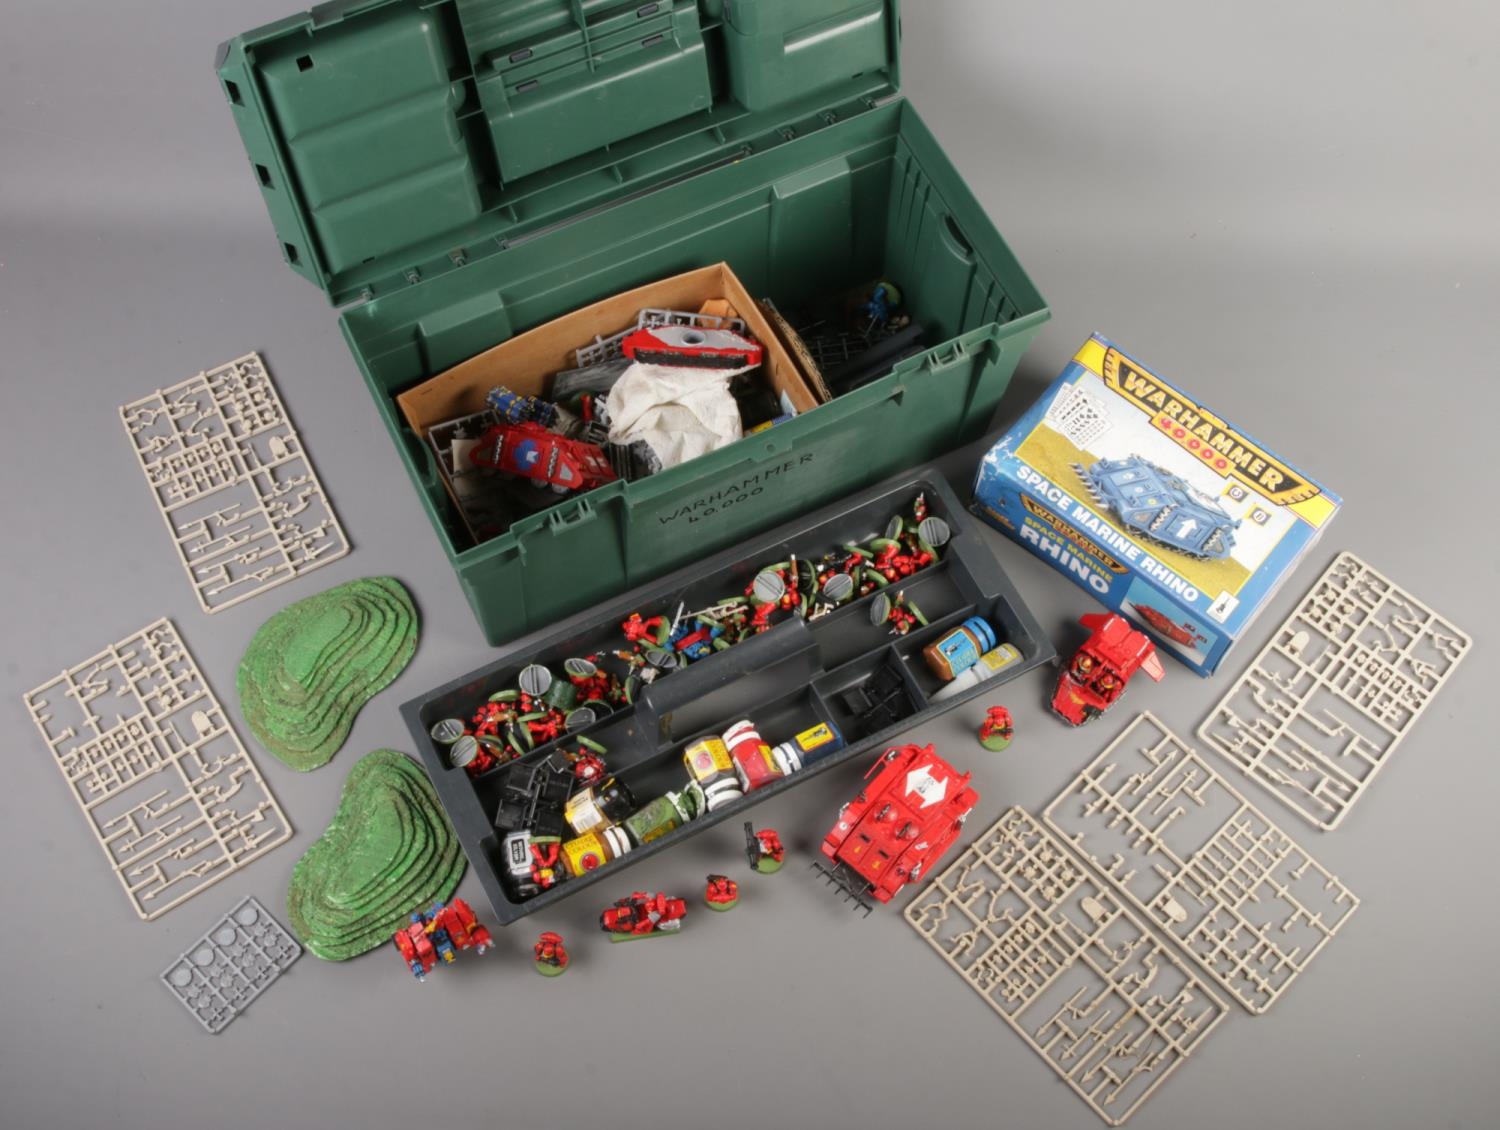 A box of Warhammer 40,000 accessories. Including figures, tanks, etc.